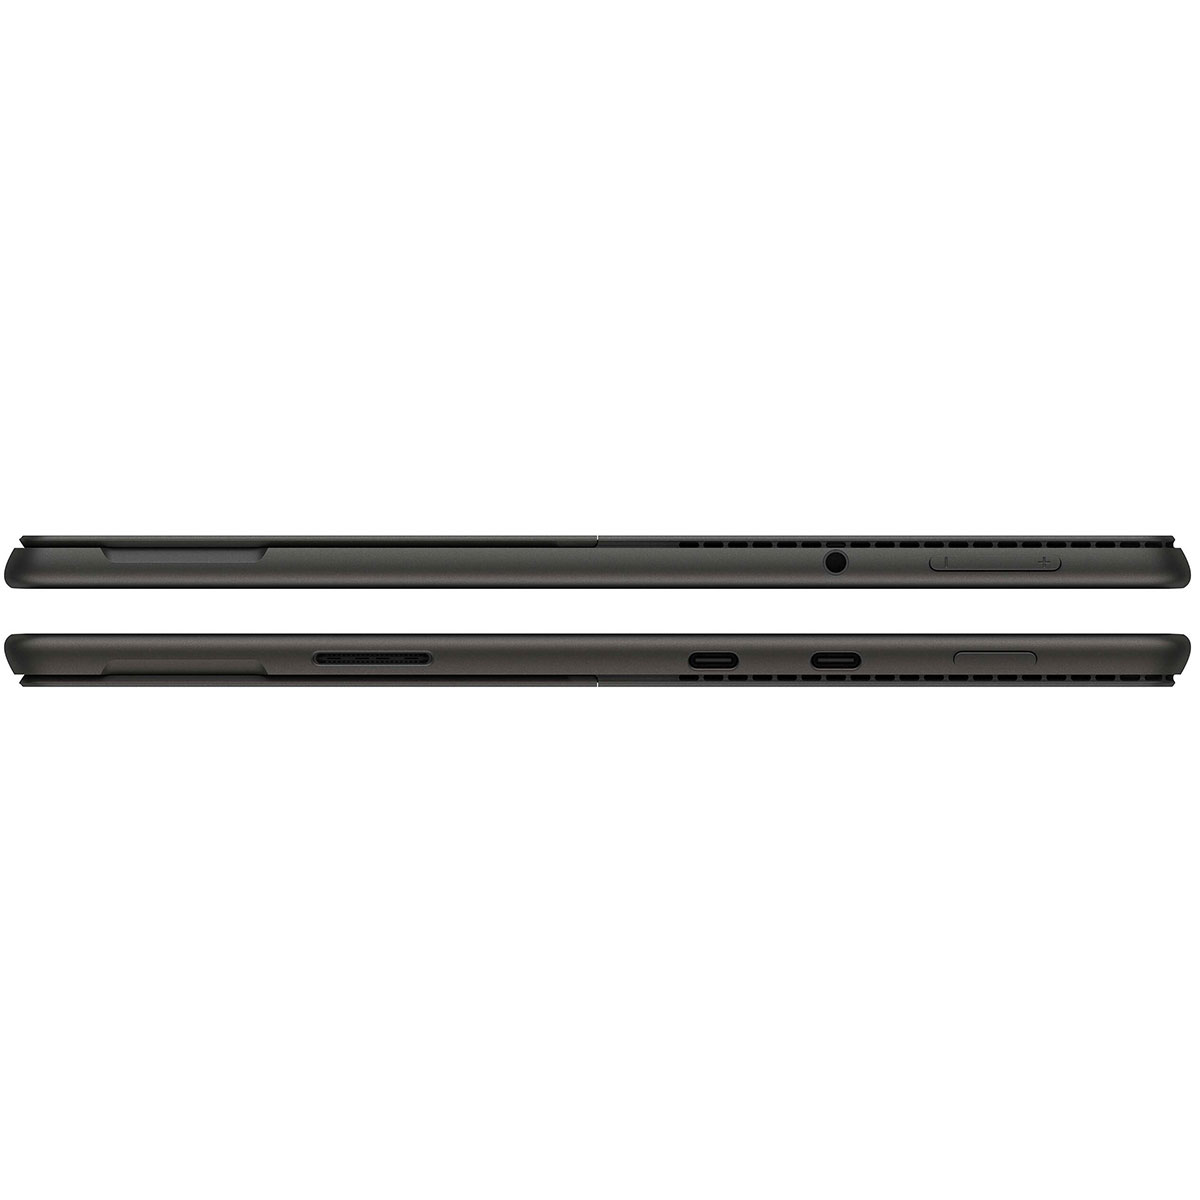 Microsoft Surface Pro 7 12.3 Touch Screen Intel Core i7 16GB Memory 512GB  SSD Device Only (Latest Model) Platinum VAT-00001 - Best Buy